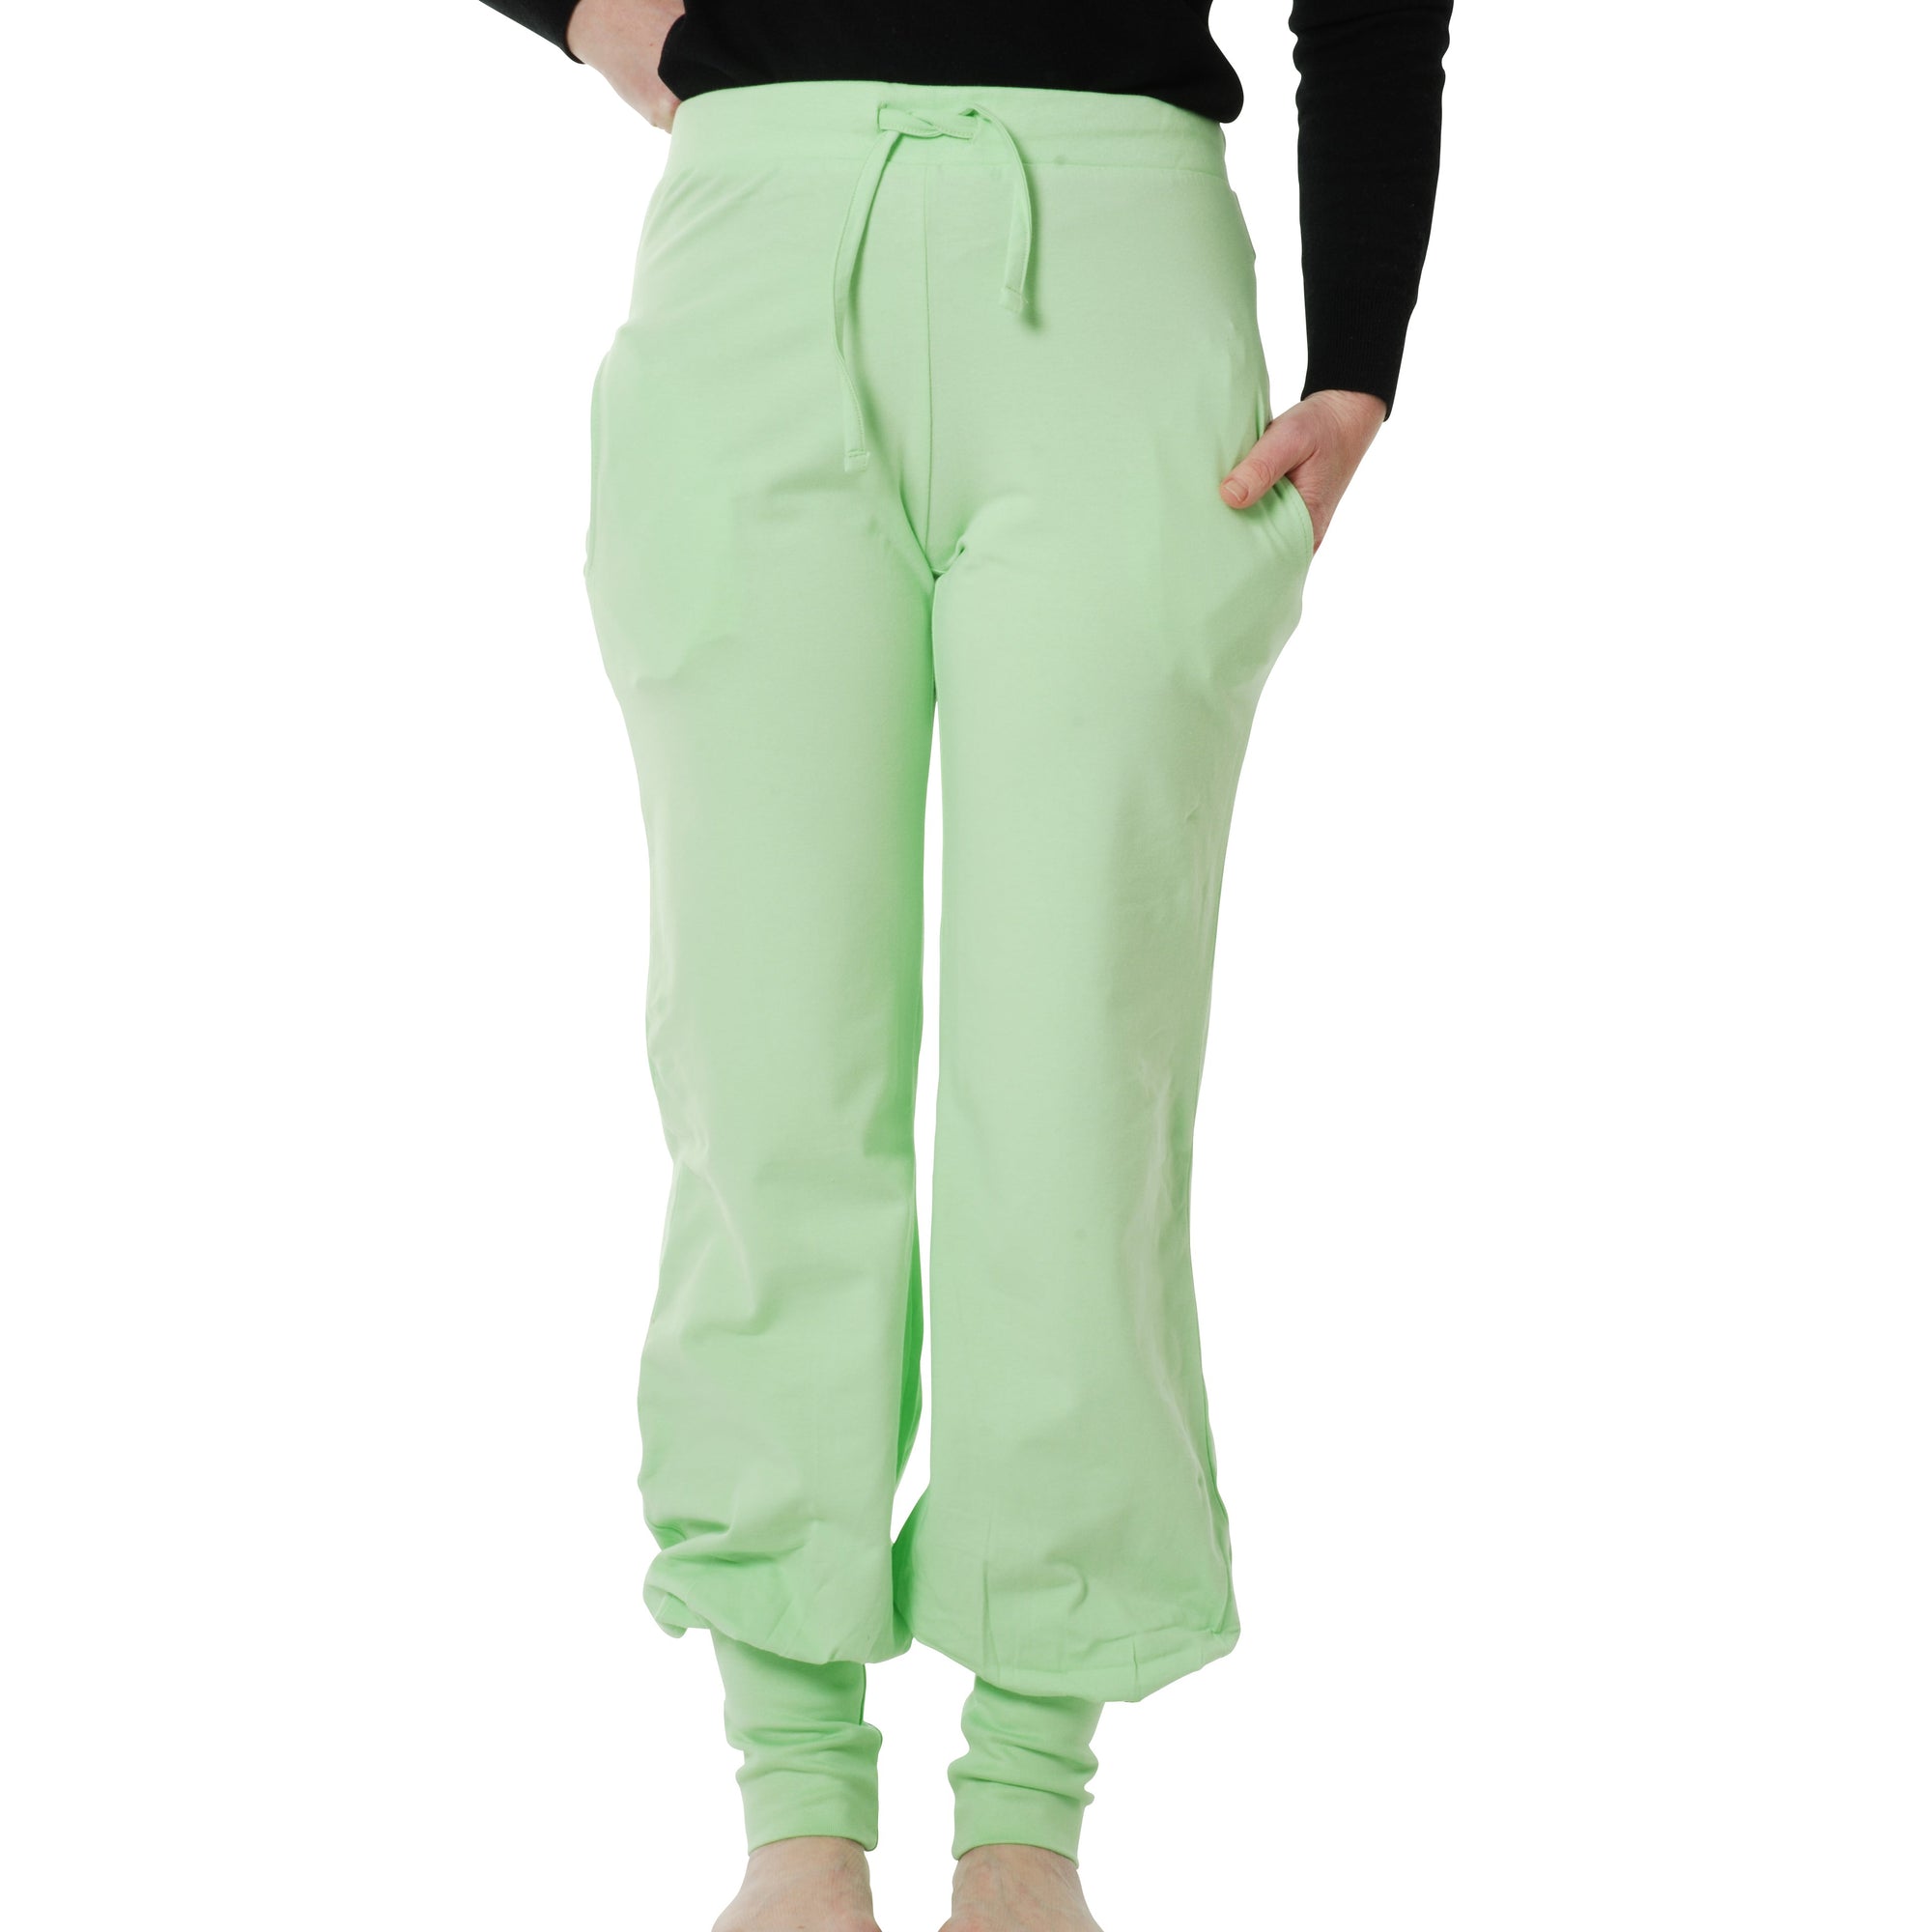 Adult's Paradise Green Baggy Pants-More Than A Fling-Modern Rascals